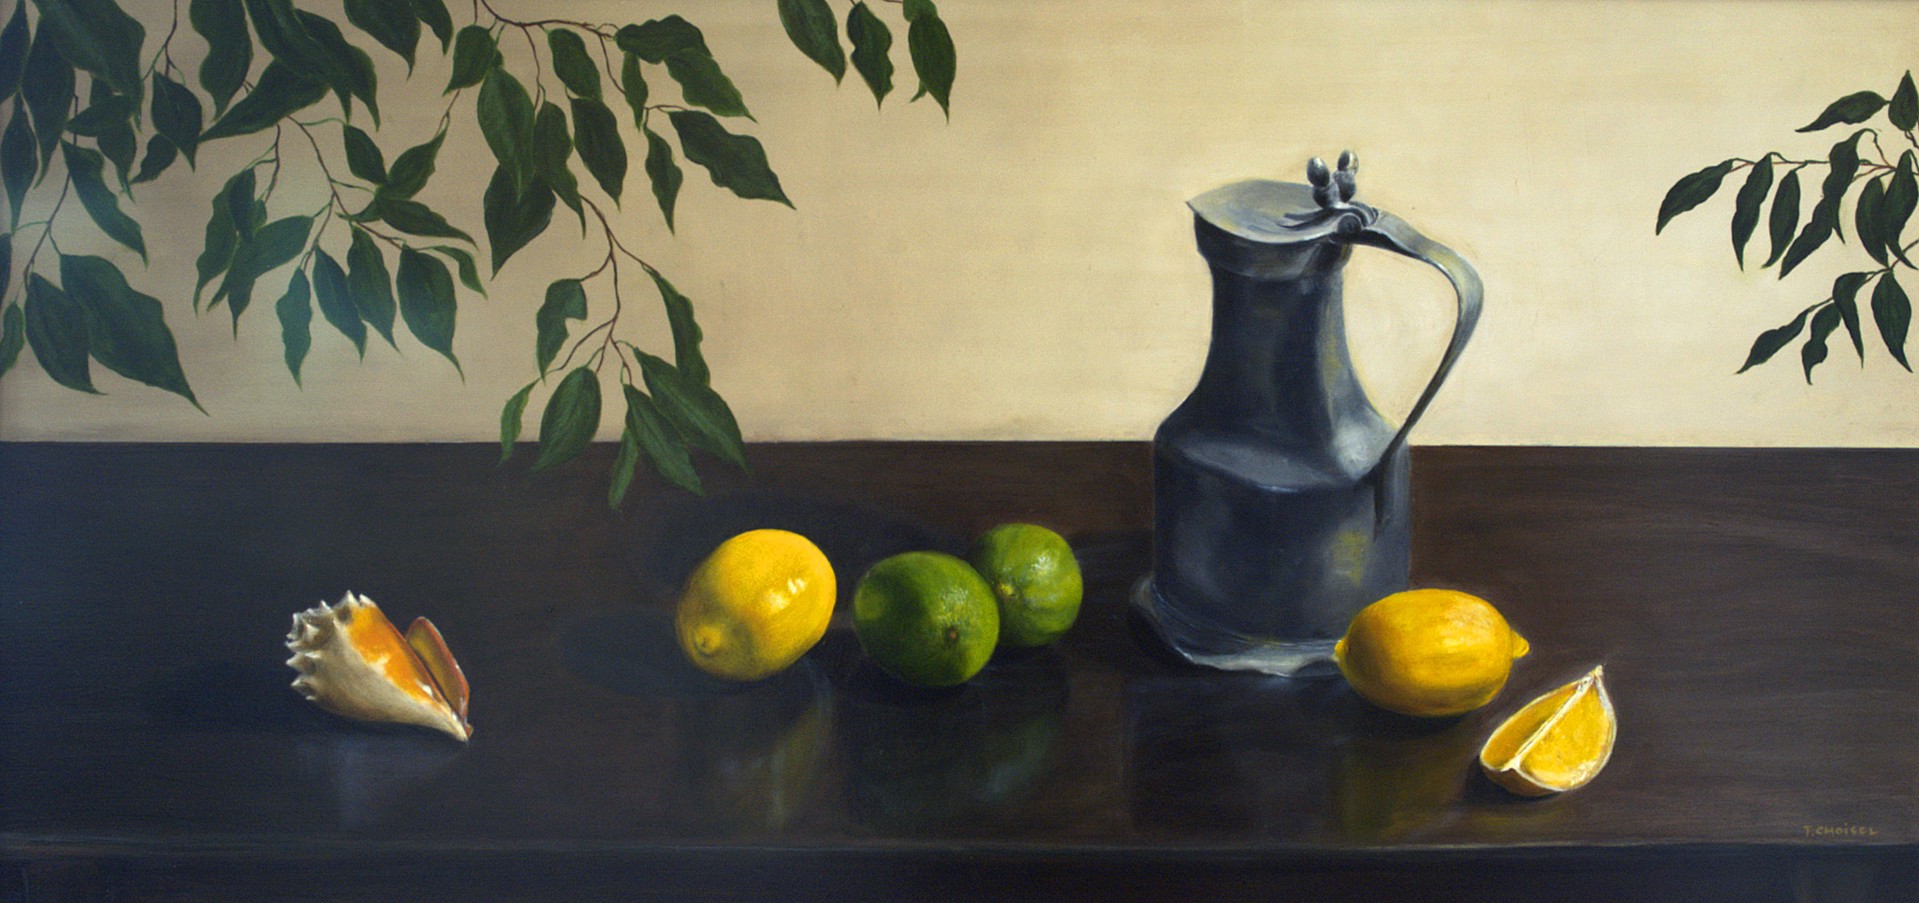 Pitcher, Shell and Lemons on Table by Frederic Choisel